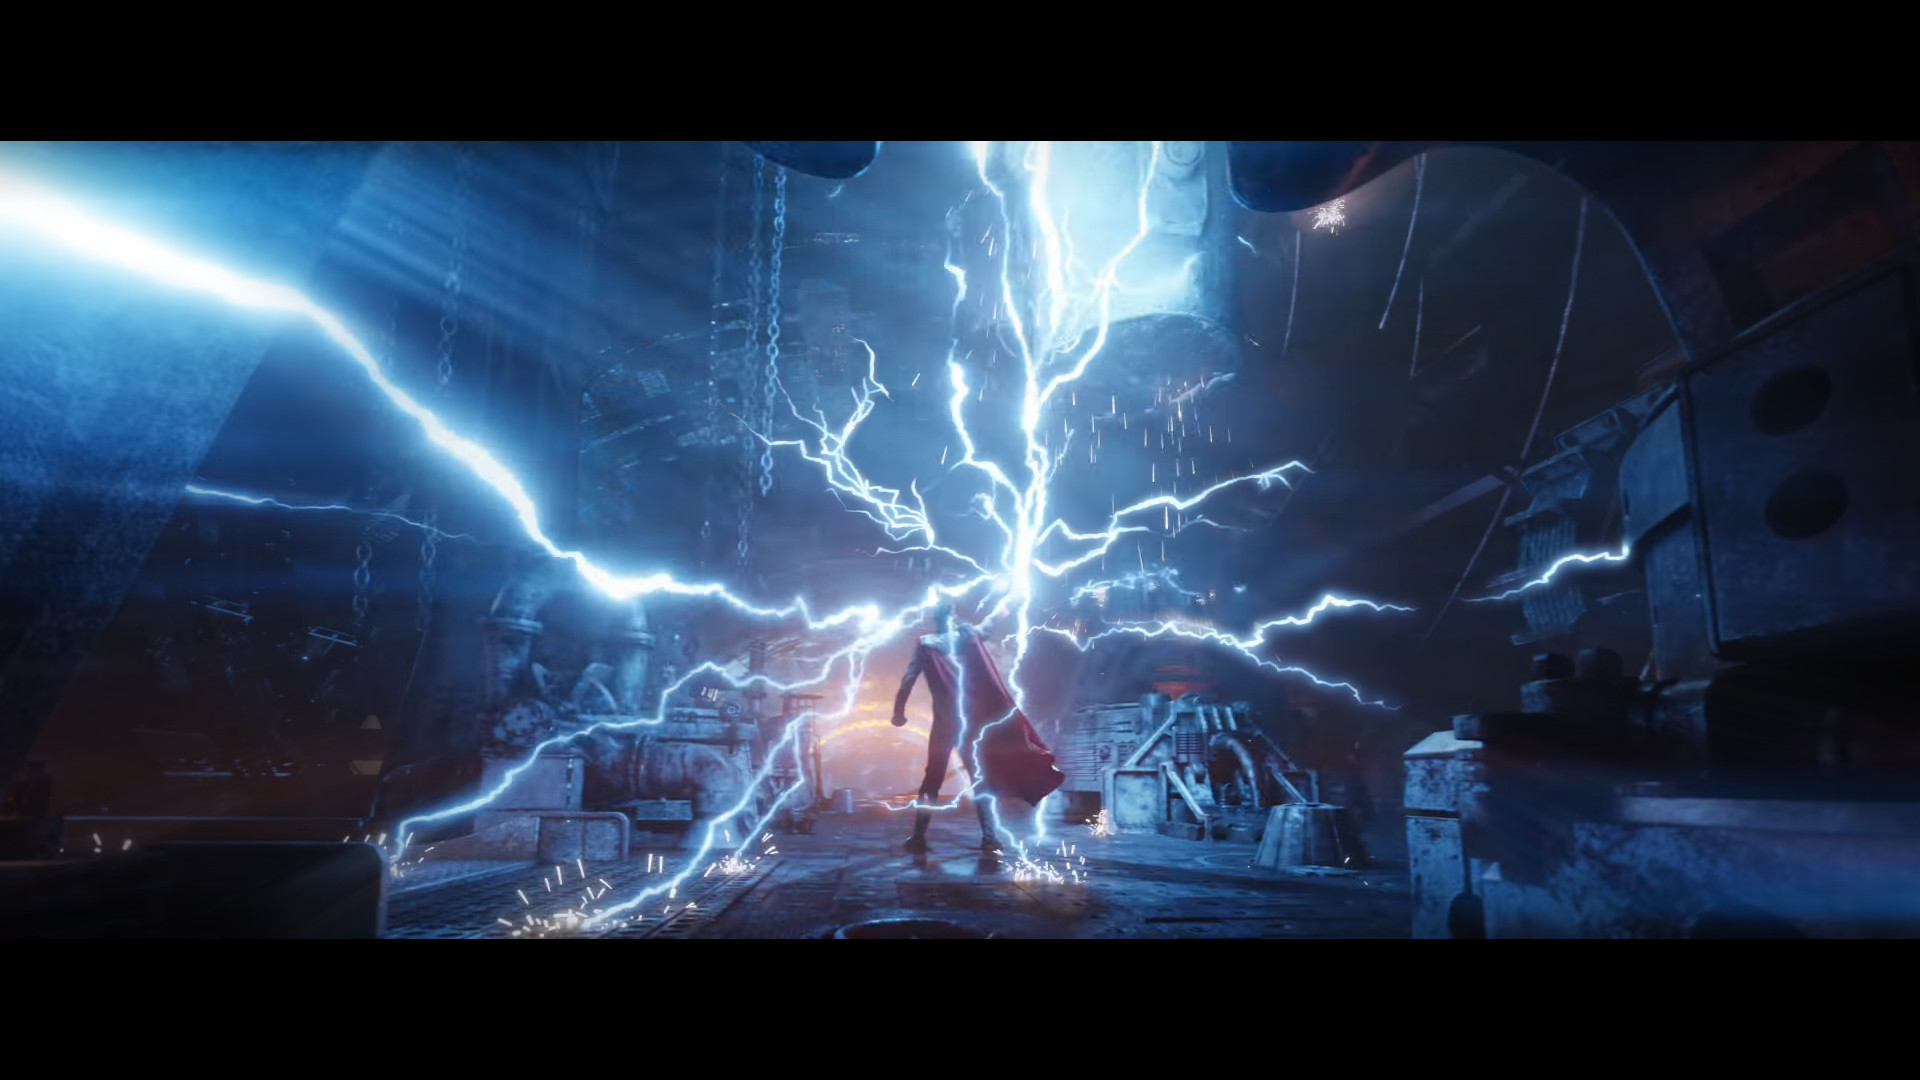 1920x1080 Made this Thor scene into a wallpaper : marvelstudios